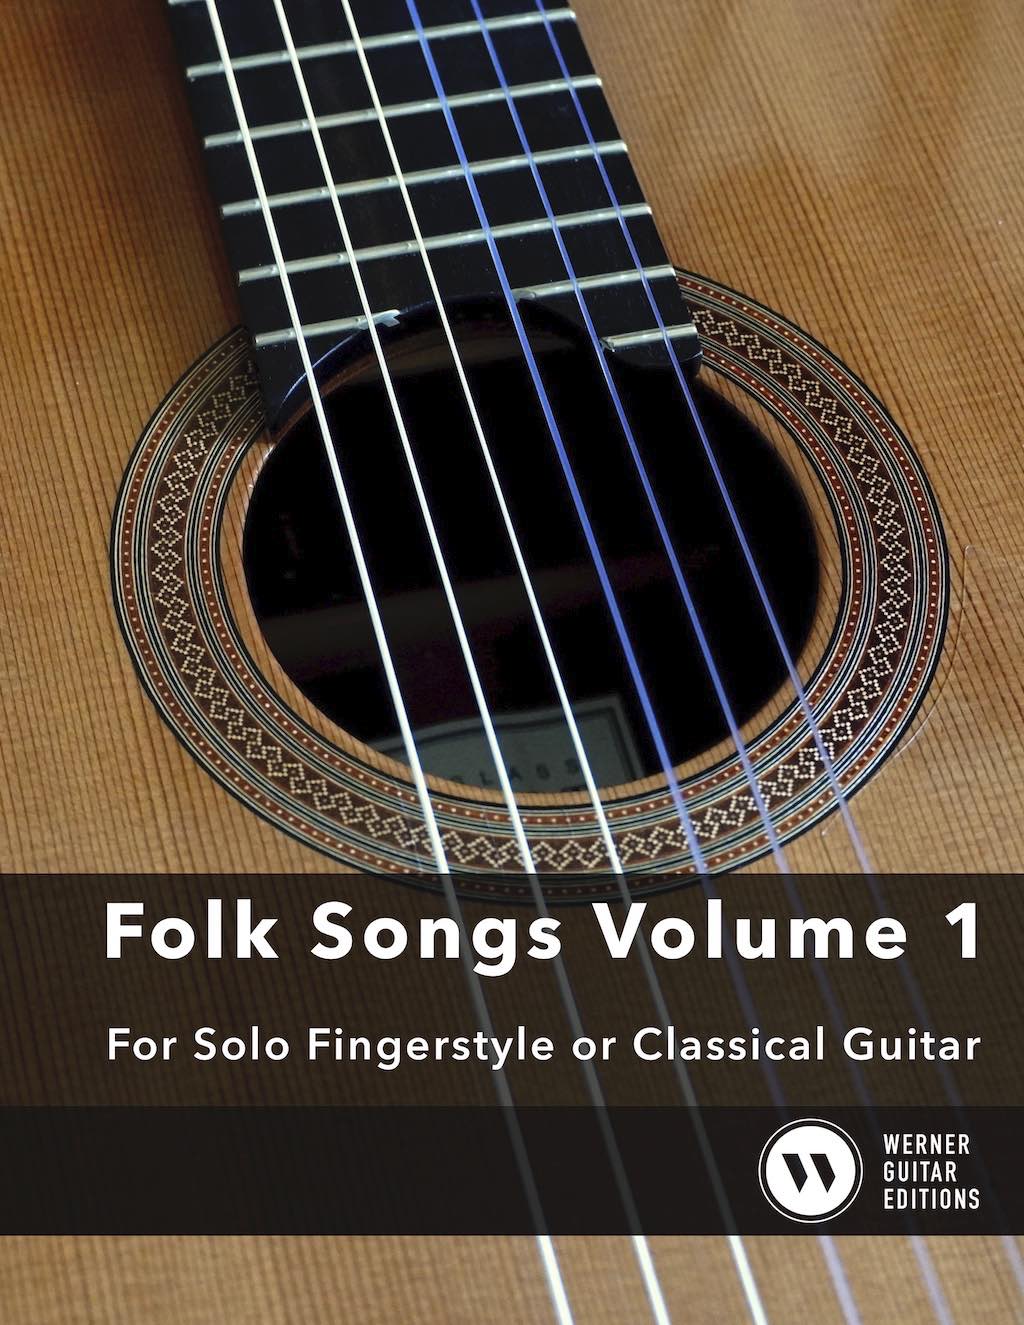 Easy Folk Songs Volume 1 - For Solo Fingerstyle or Classical Guitar